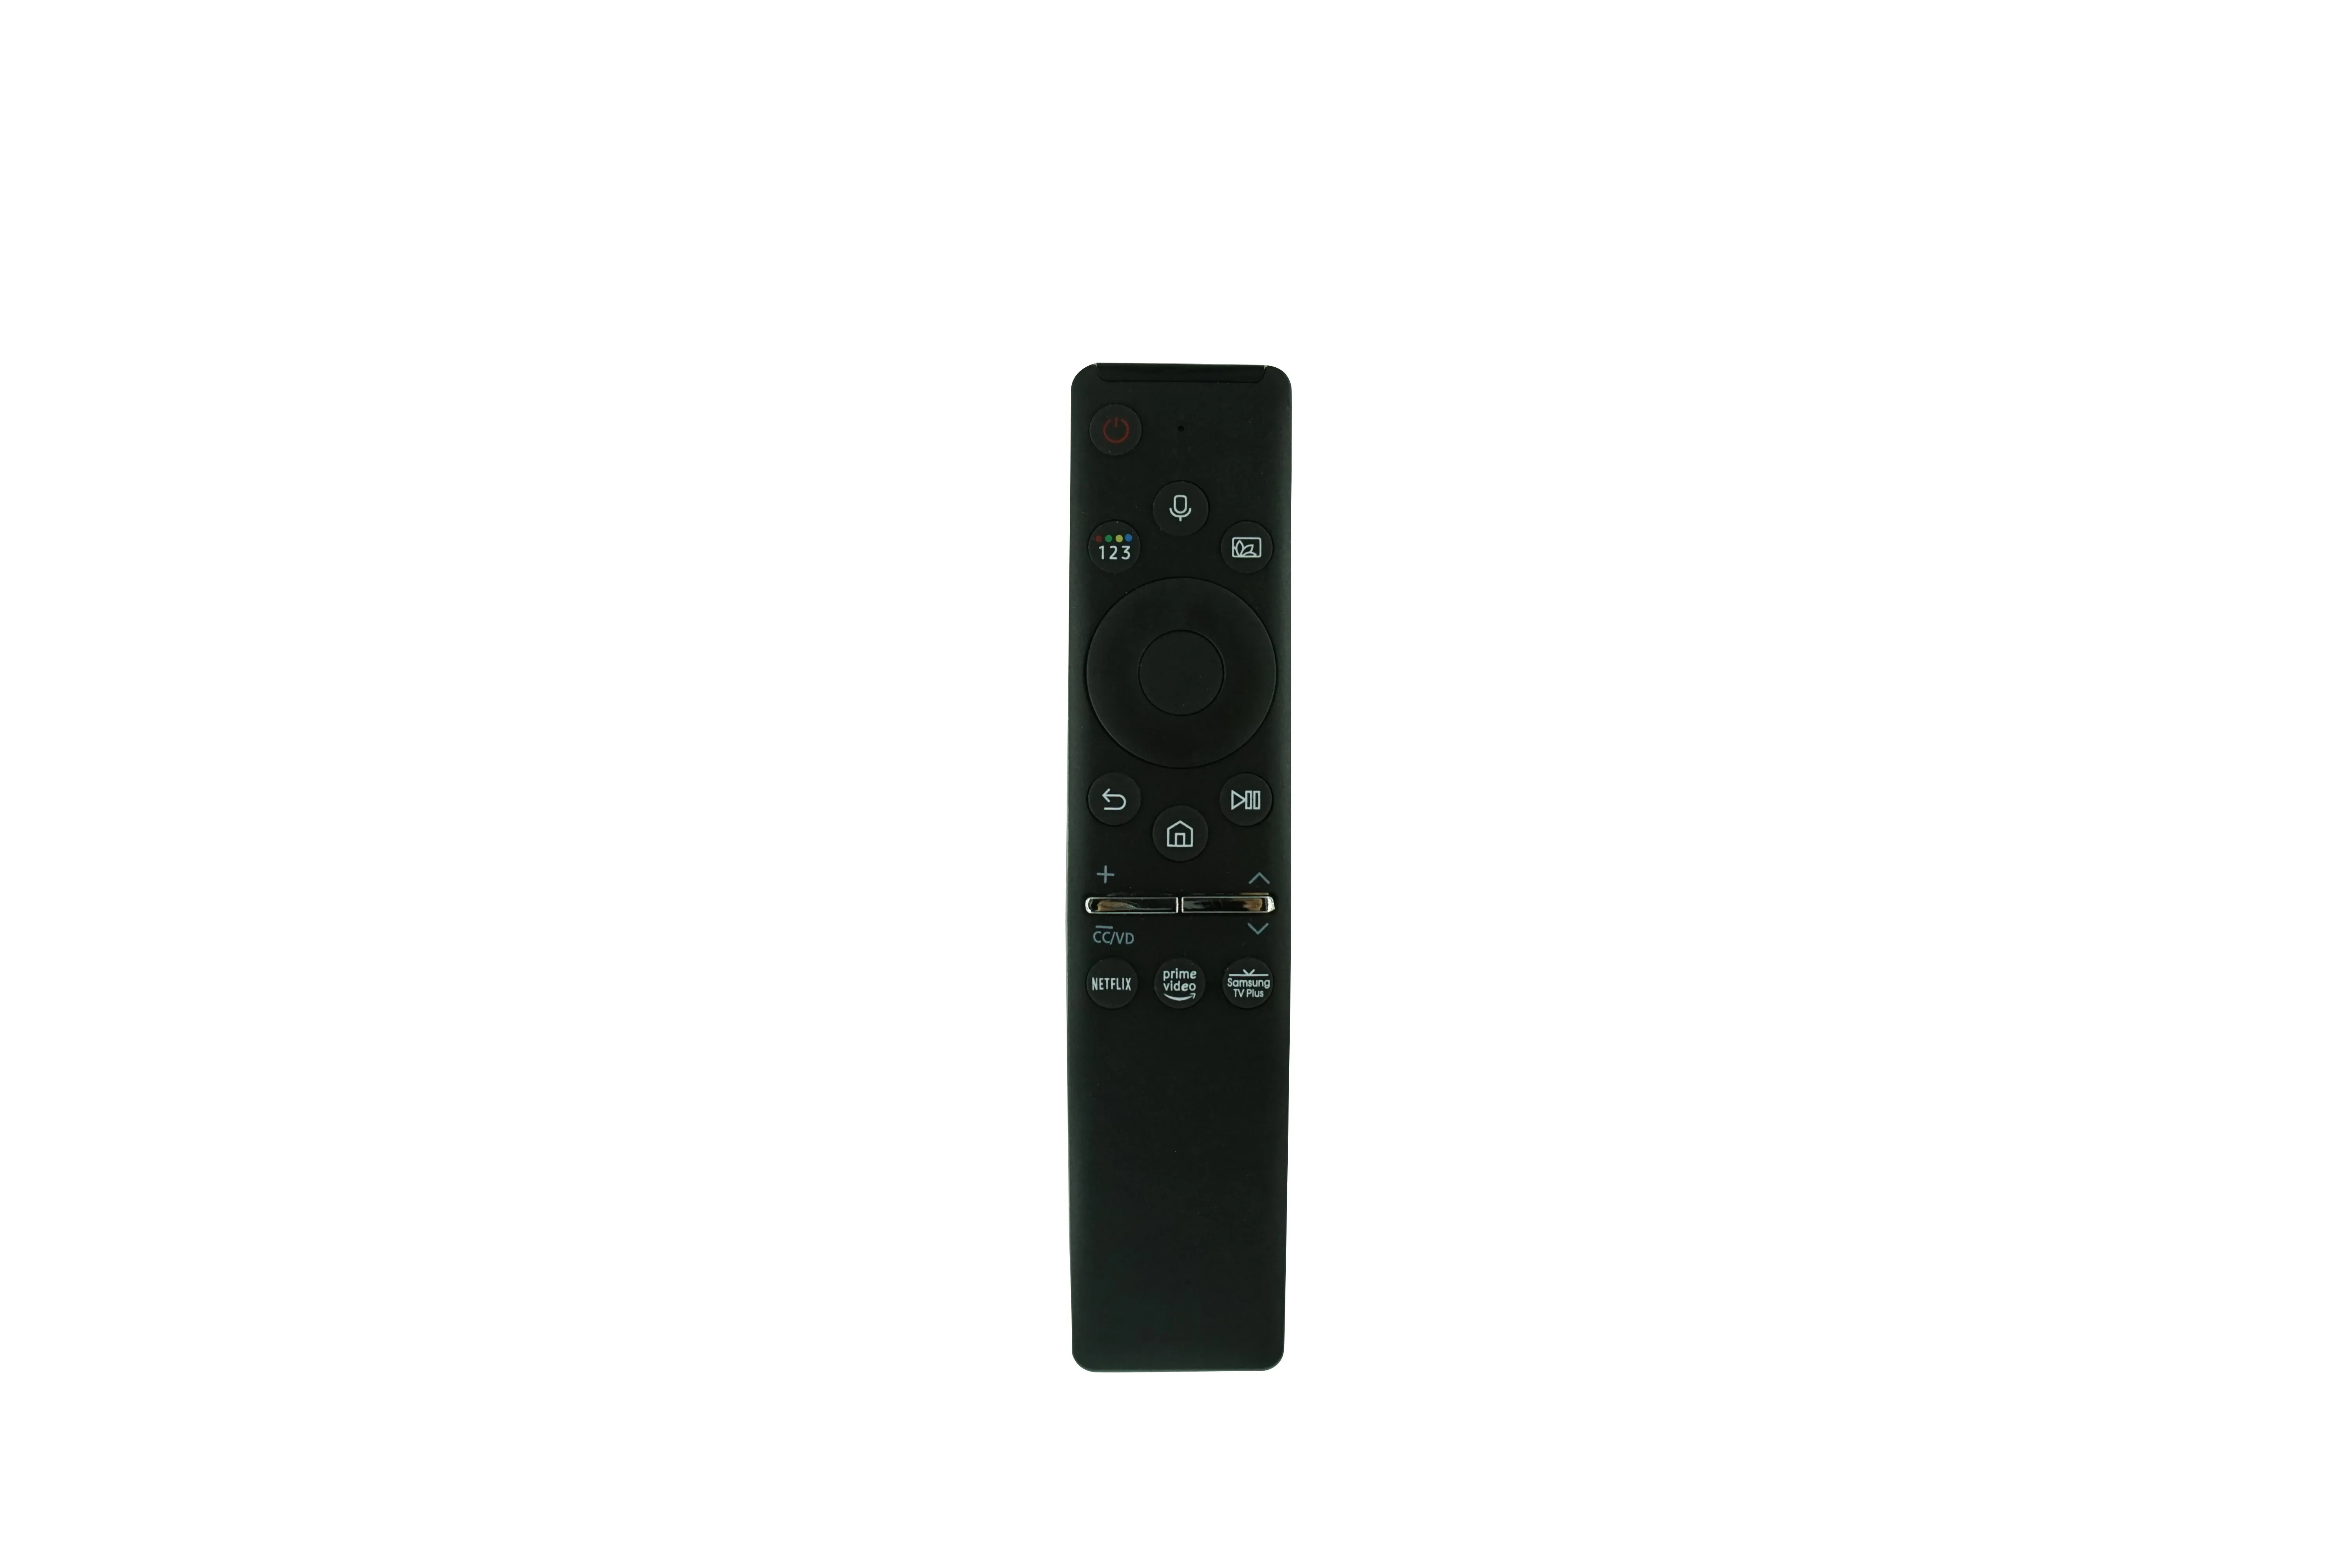 Voice Bluetooth Remote Control For Samsung BN59-01312K UA55RU7400W UA55RU8000W UA65RU7400W UA65RU8000W UA82RU8000W UA55RU7400WXXY Smart LED HDTV TV